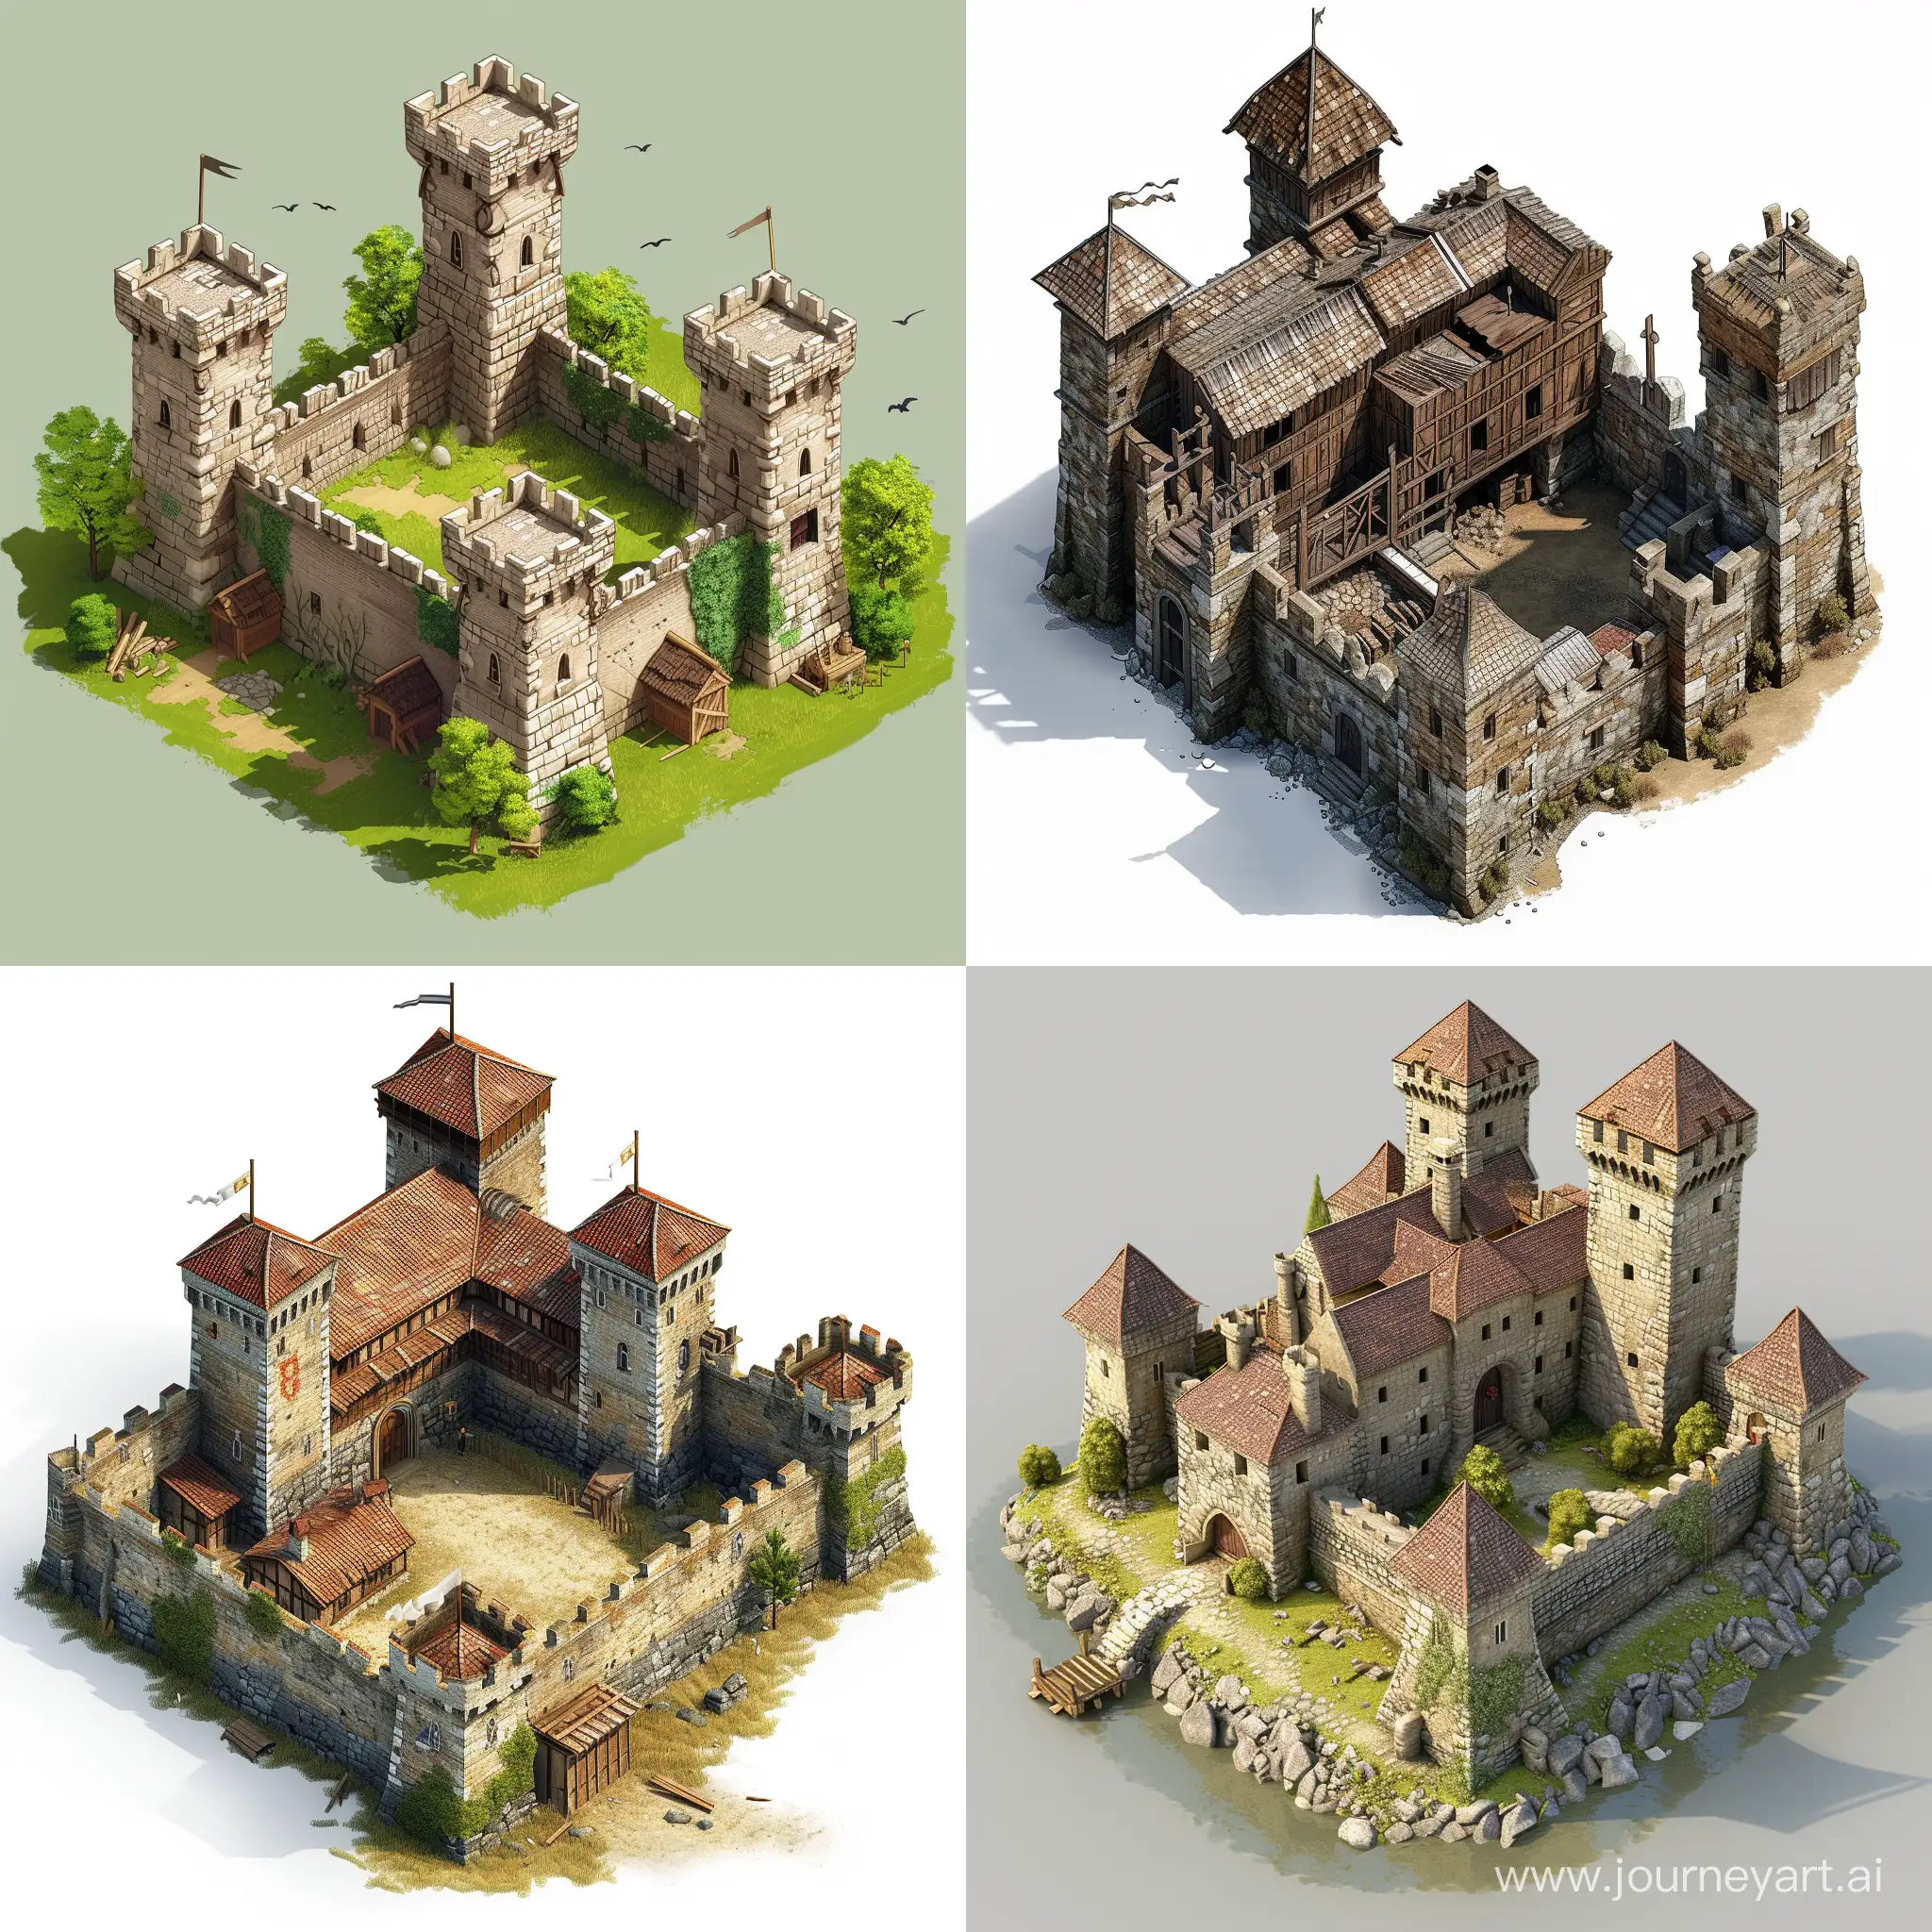 Draw model of medieval stronghold for real time strategy geme (RTS), isometric view, realistic